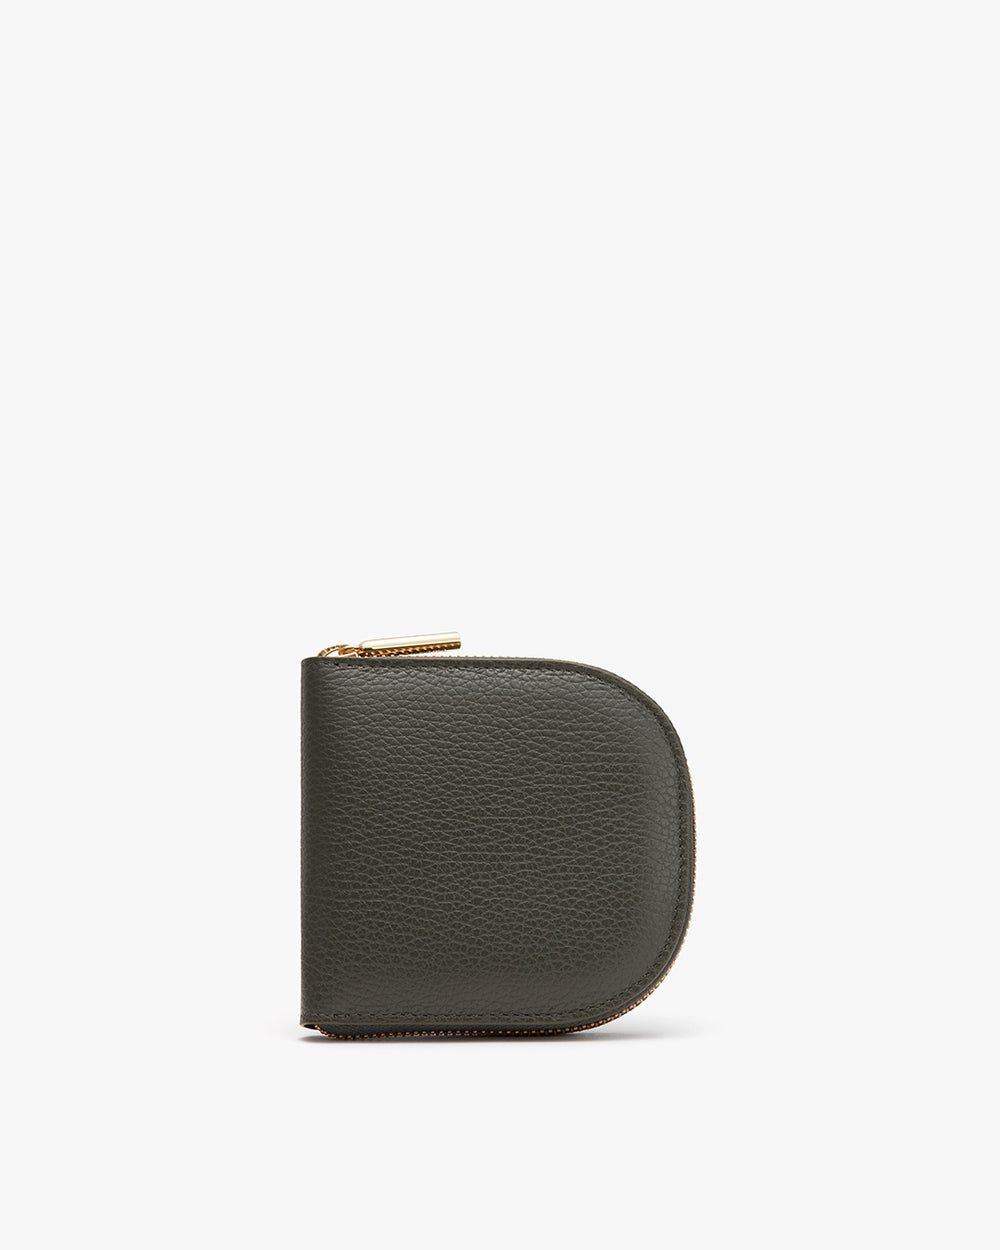 Small closed wallet with a zipper on a plain background.